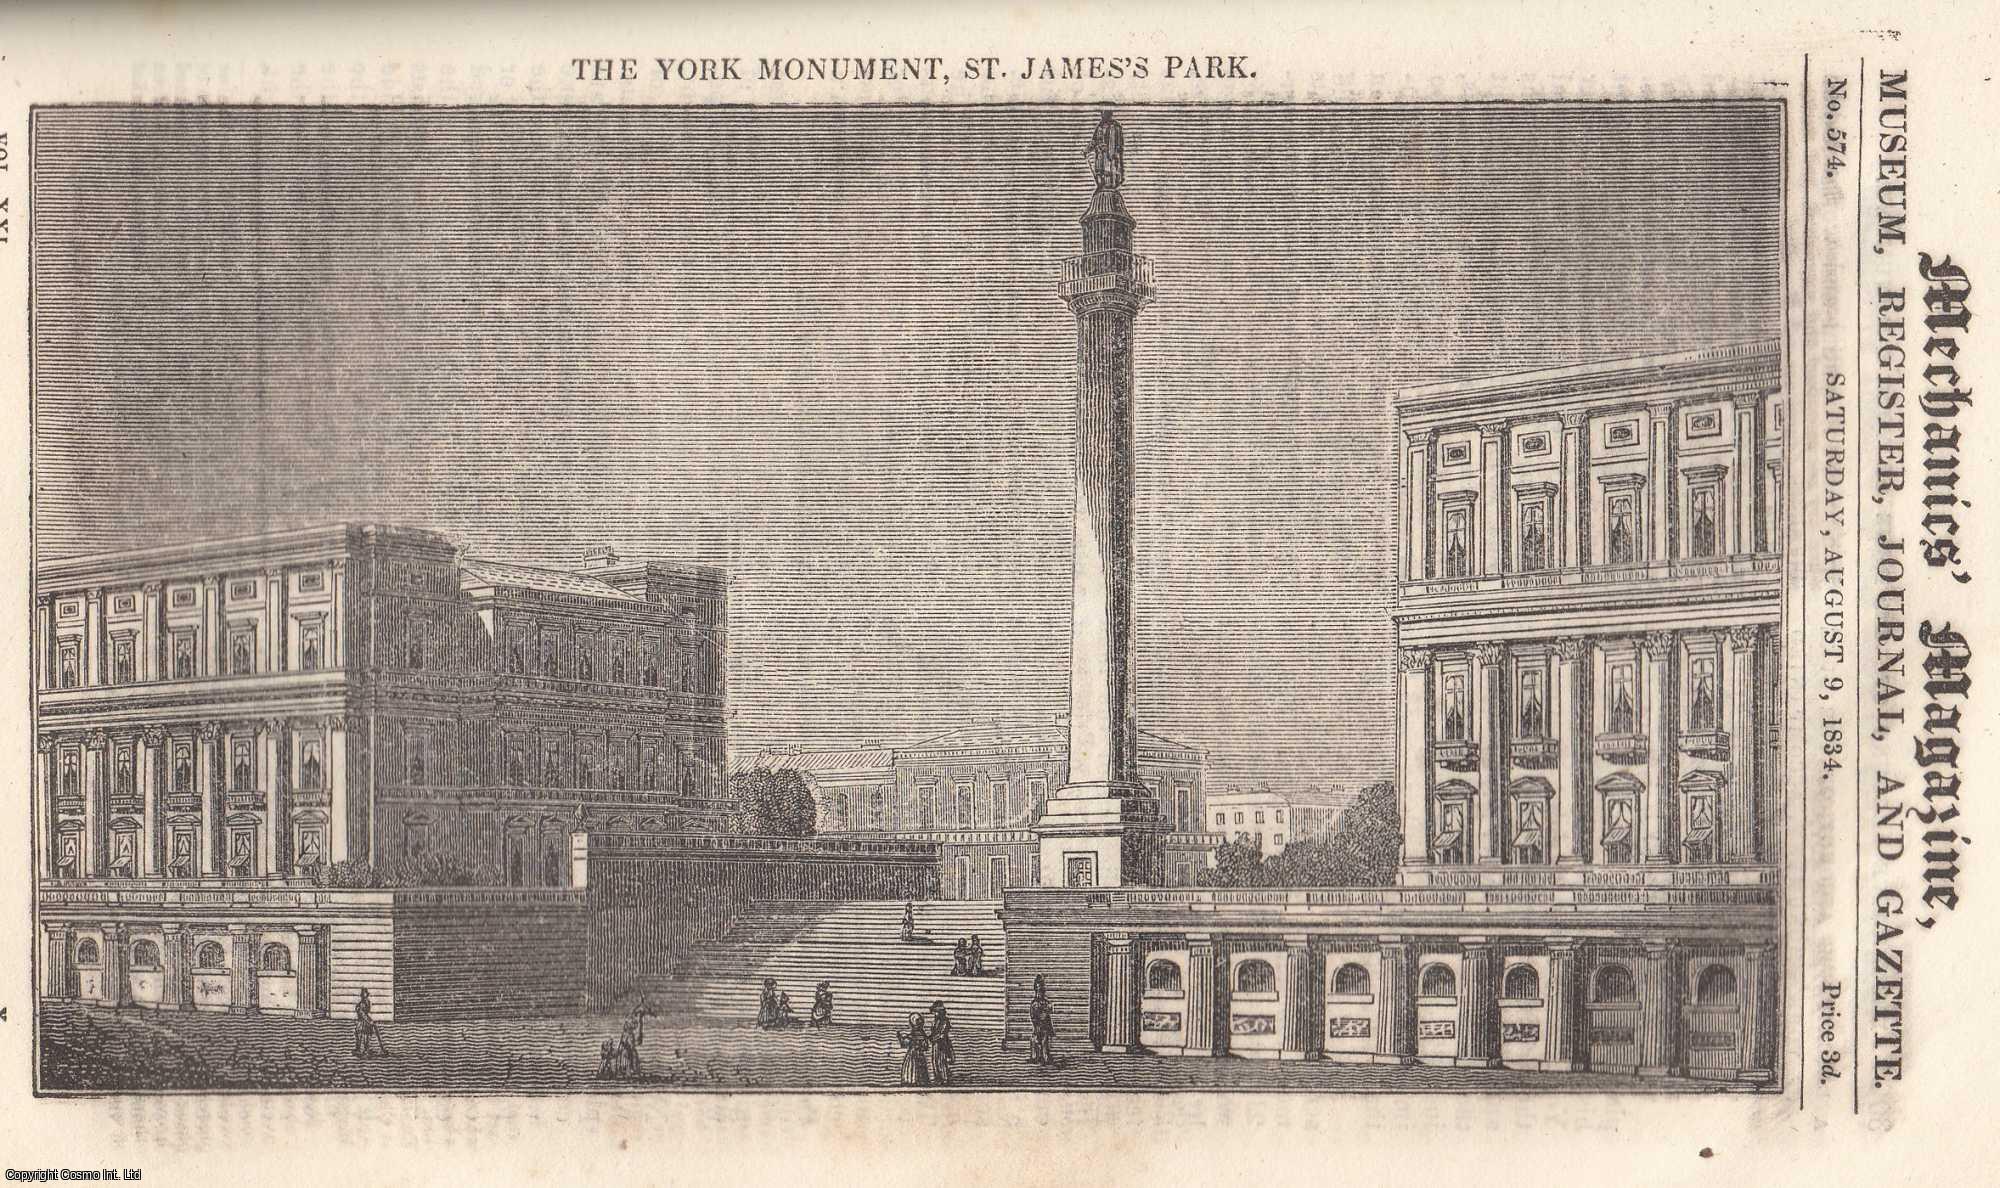 Mechanics Magazine - The York Monument, St. Jame's Park; Descriptive Account of The Duke of York's Monument; Points of Architectural Sublimity in London; Lang's History of New South Wales; Iron and Steel Manufactures, etc. Mechanics Magazine, Museum, Register, Journal and Gazette. Issue No. 574. A complete rare weekly issue of the Mechanics' Magazine, 1834.